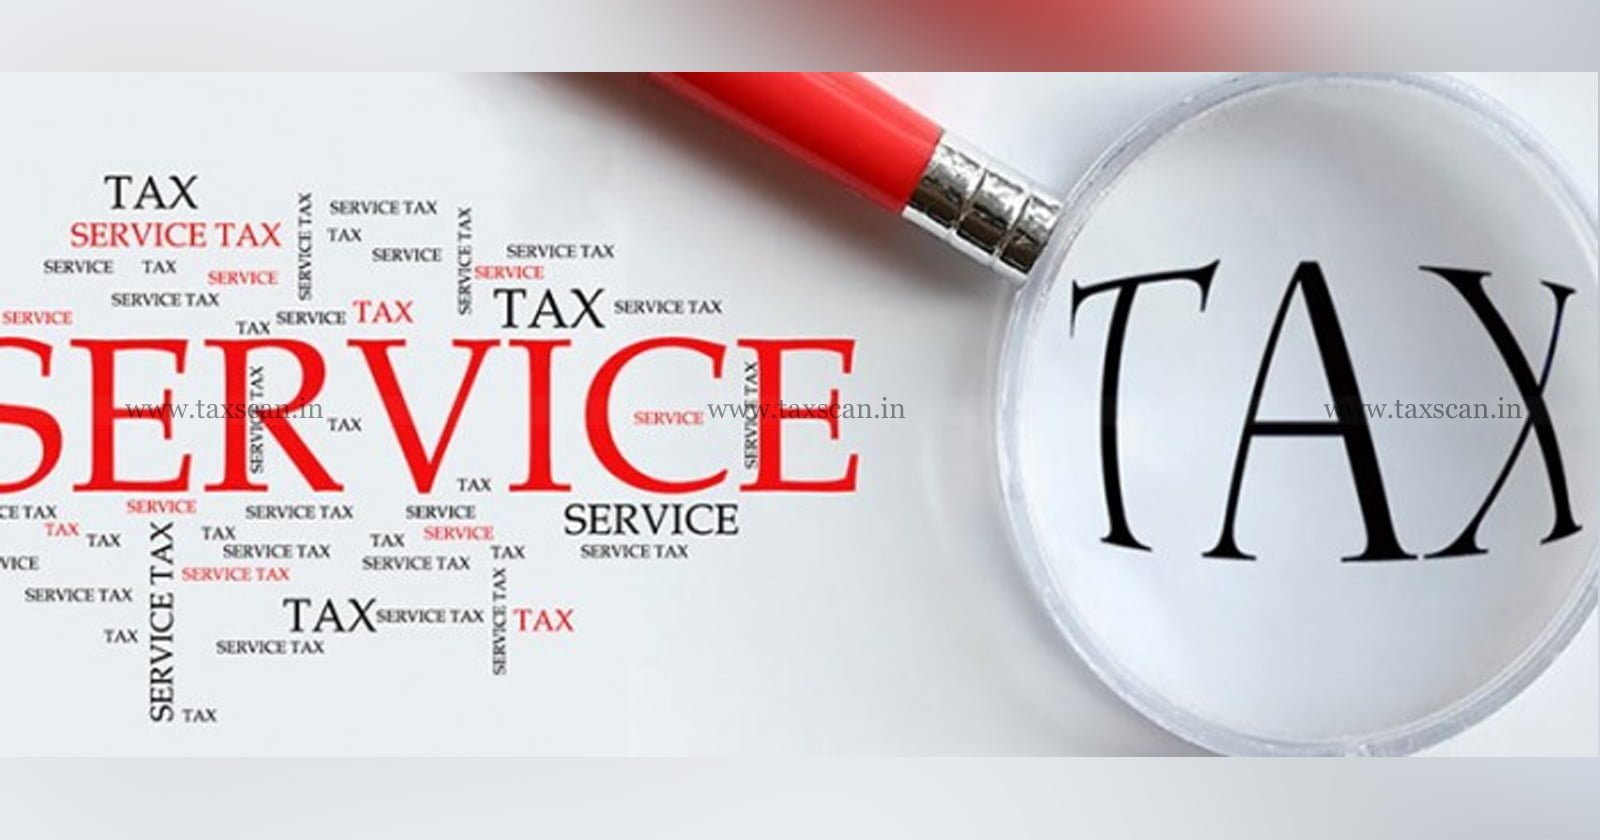 No Service Tax - Service Tax - No Service Tax on Commission Paid - Commission Paid - Foreign Agents - Foreign Agents Under Service Tax Exemption - CESTAT - Customs - Excise - taxscan